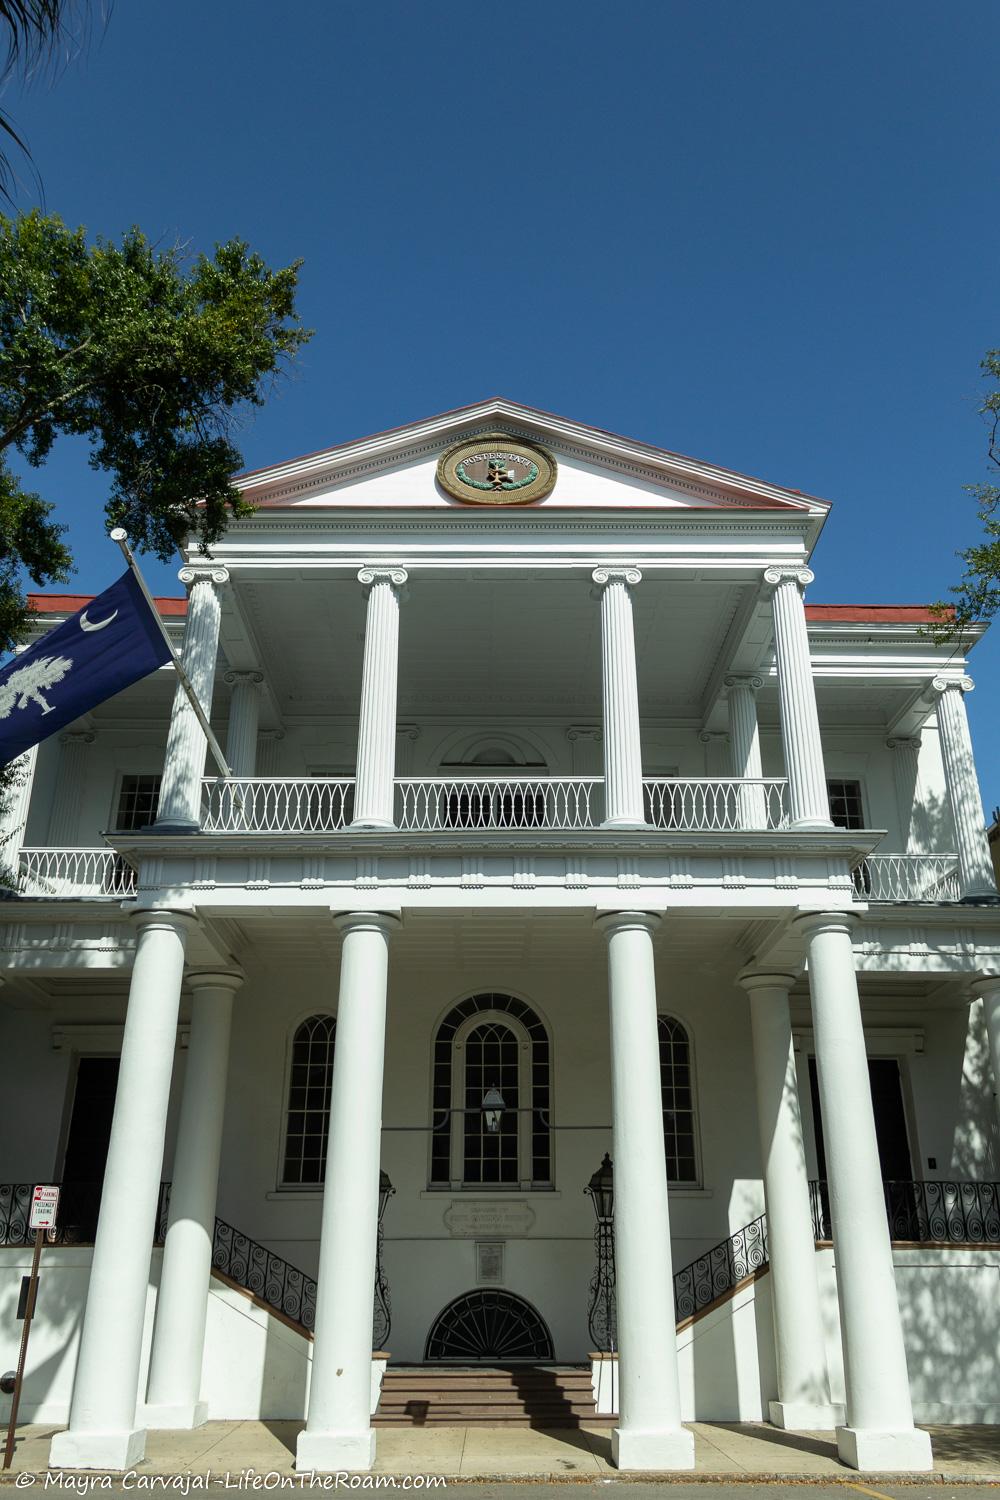 A historic house with Doric and ionic columns